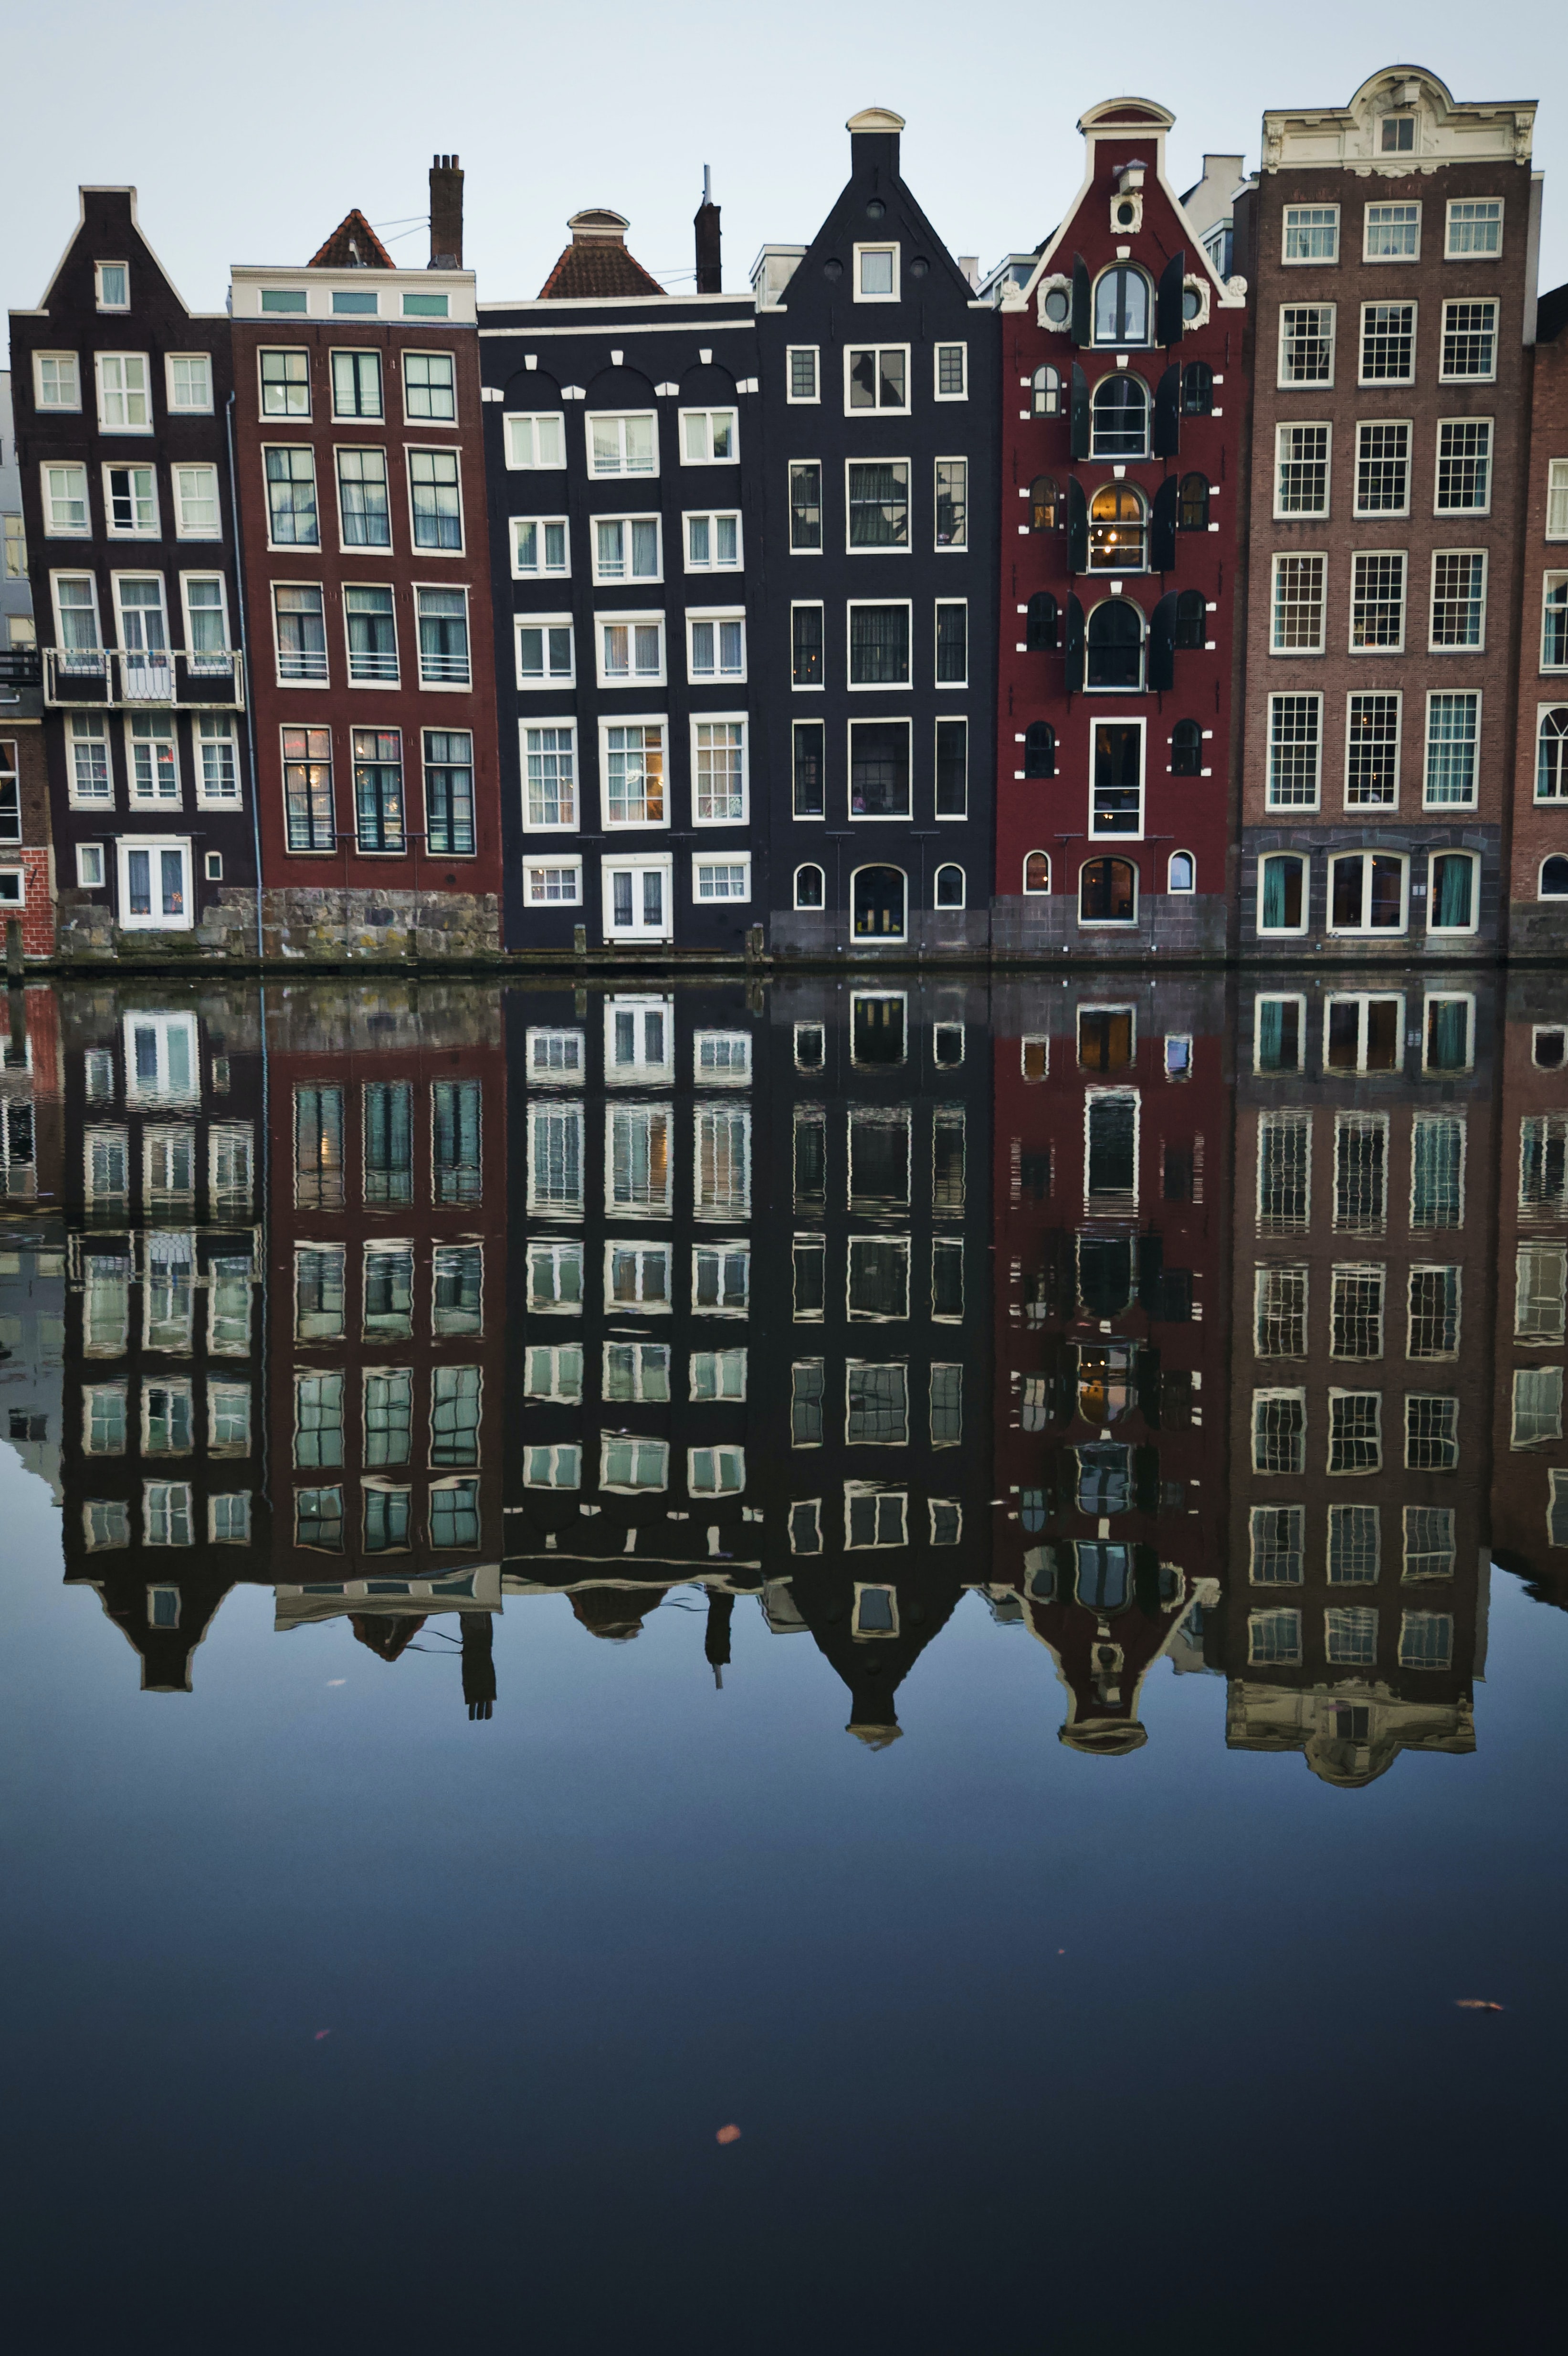 Download background cities, water, houses, architecture, building, reflection